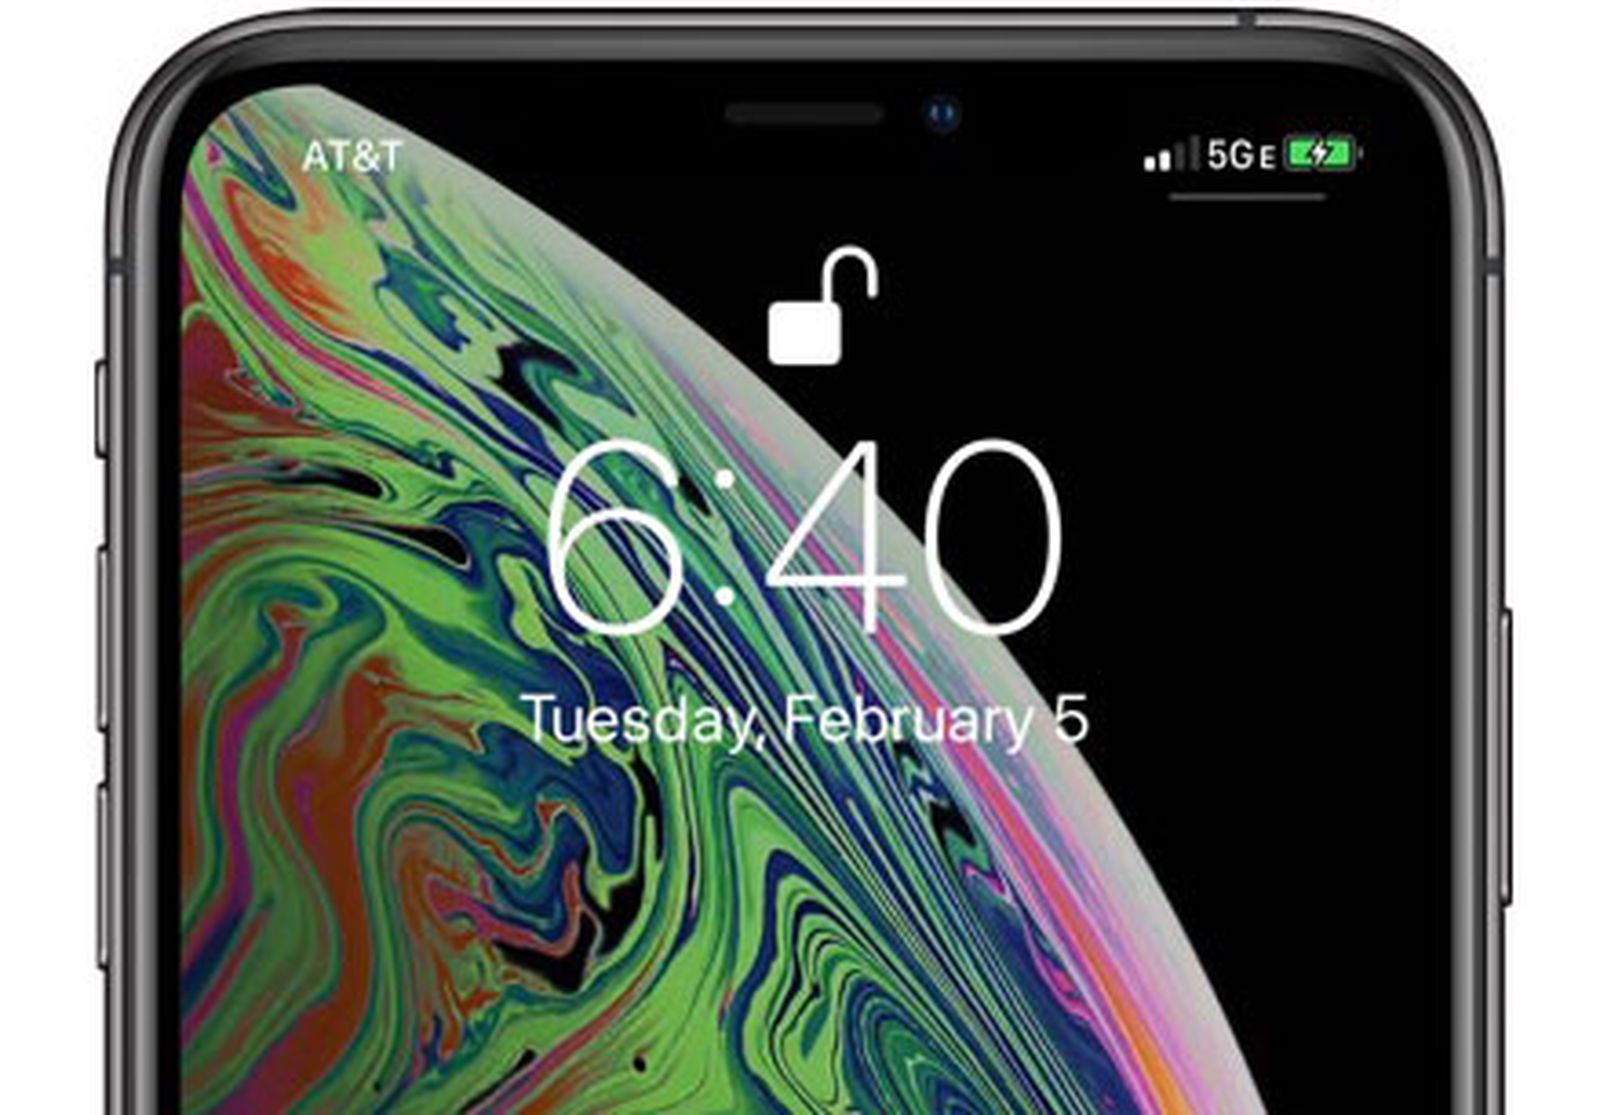 5ge At T S Misleading Label On Iphone Macrumors